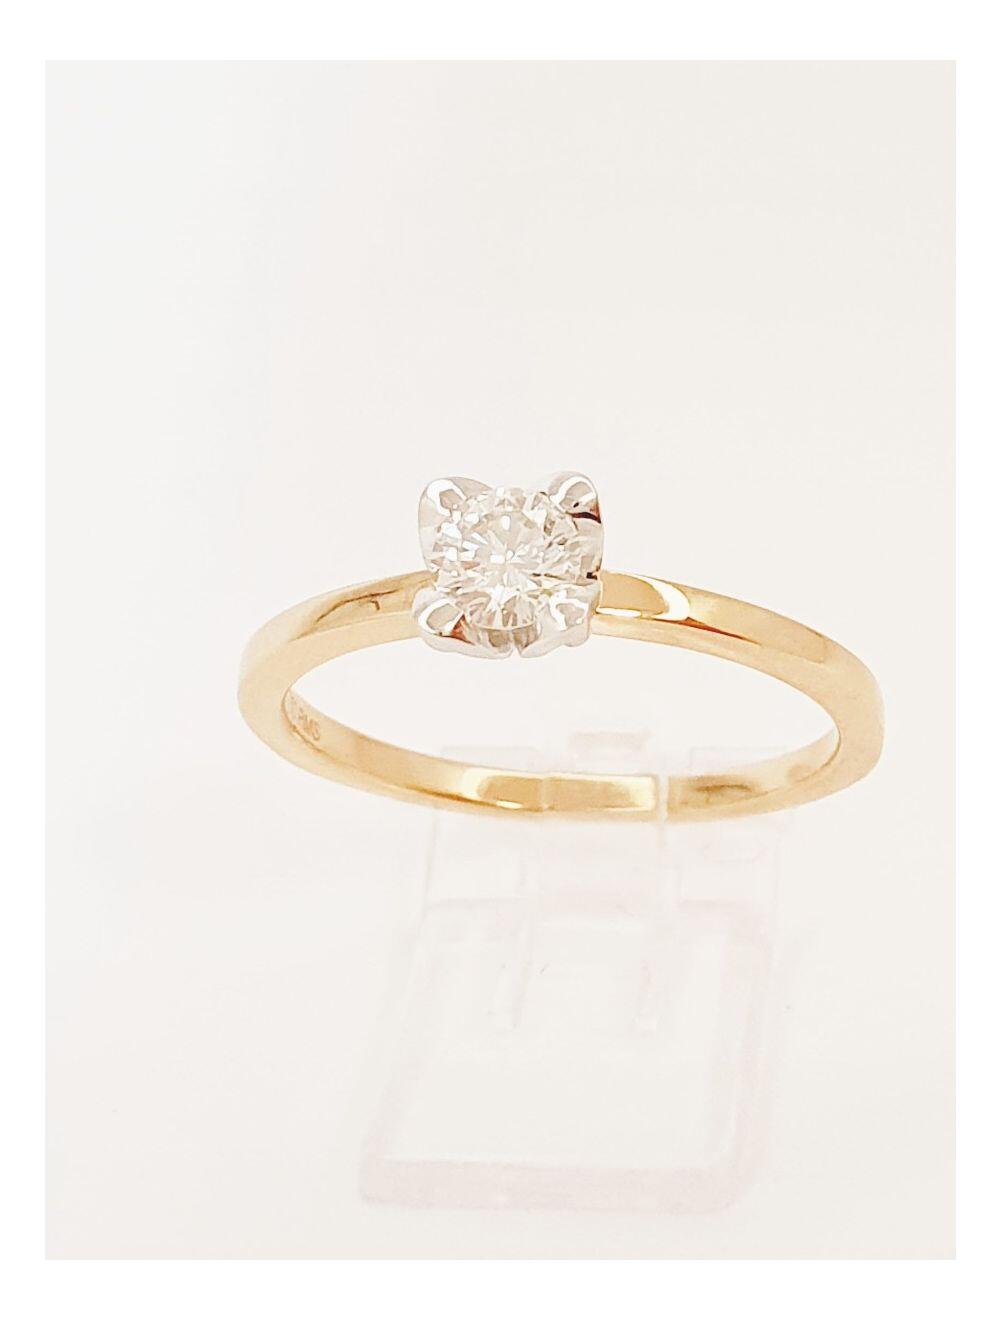 # Rose gold and white gold solitaire ring with 0.33ct natural diamond, leaf-shaped side setting